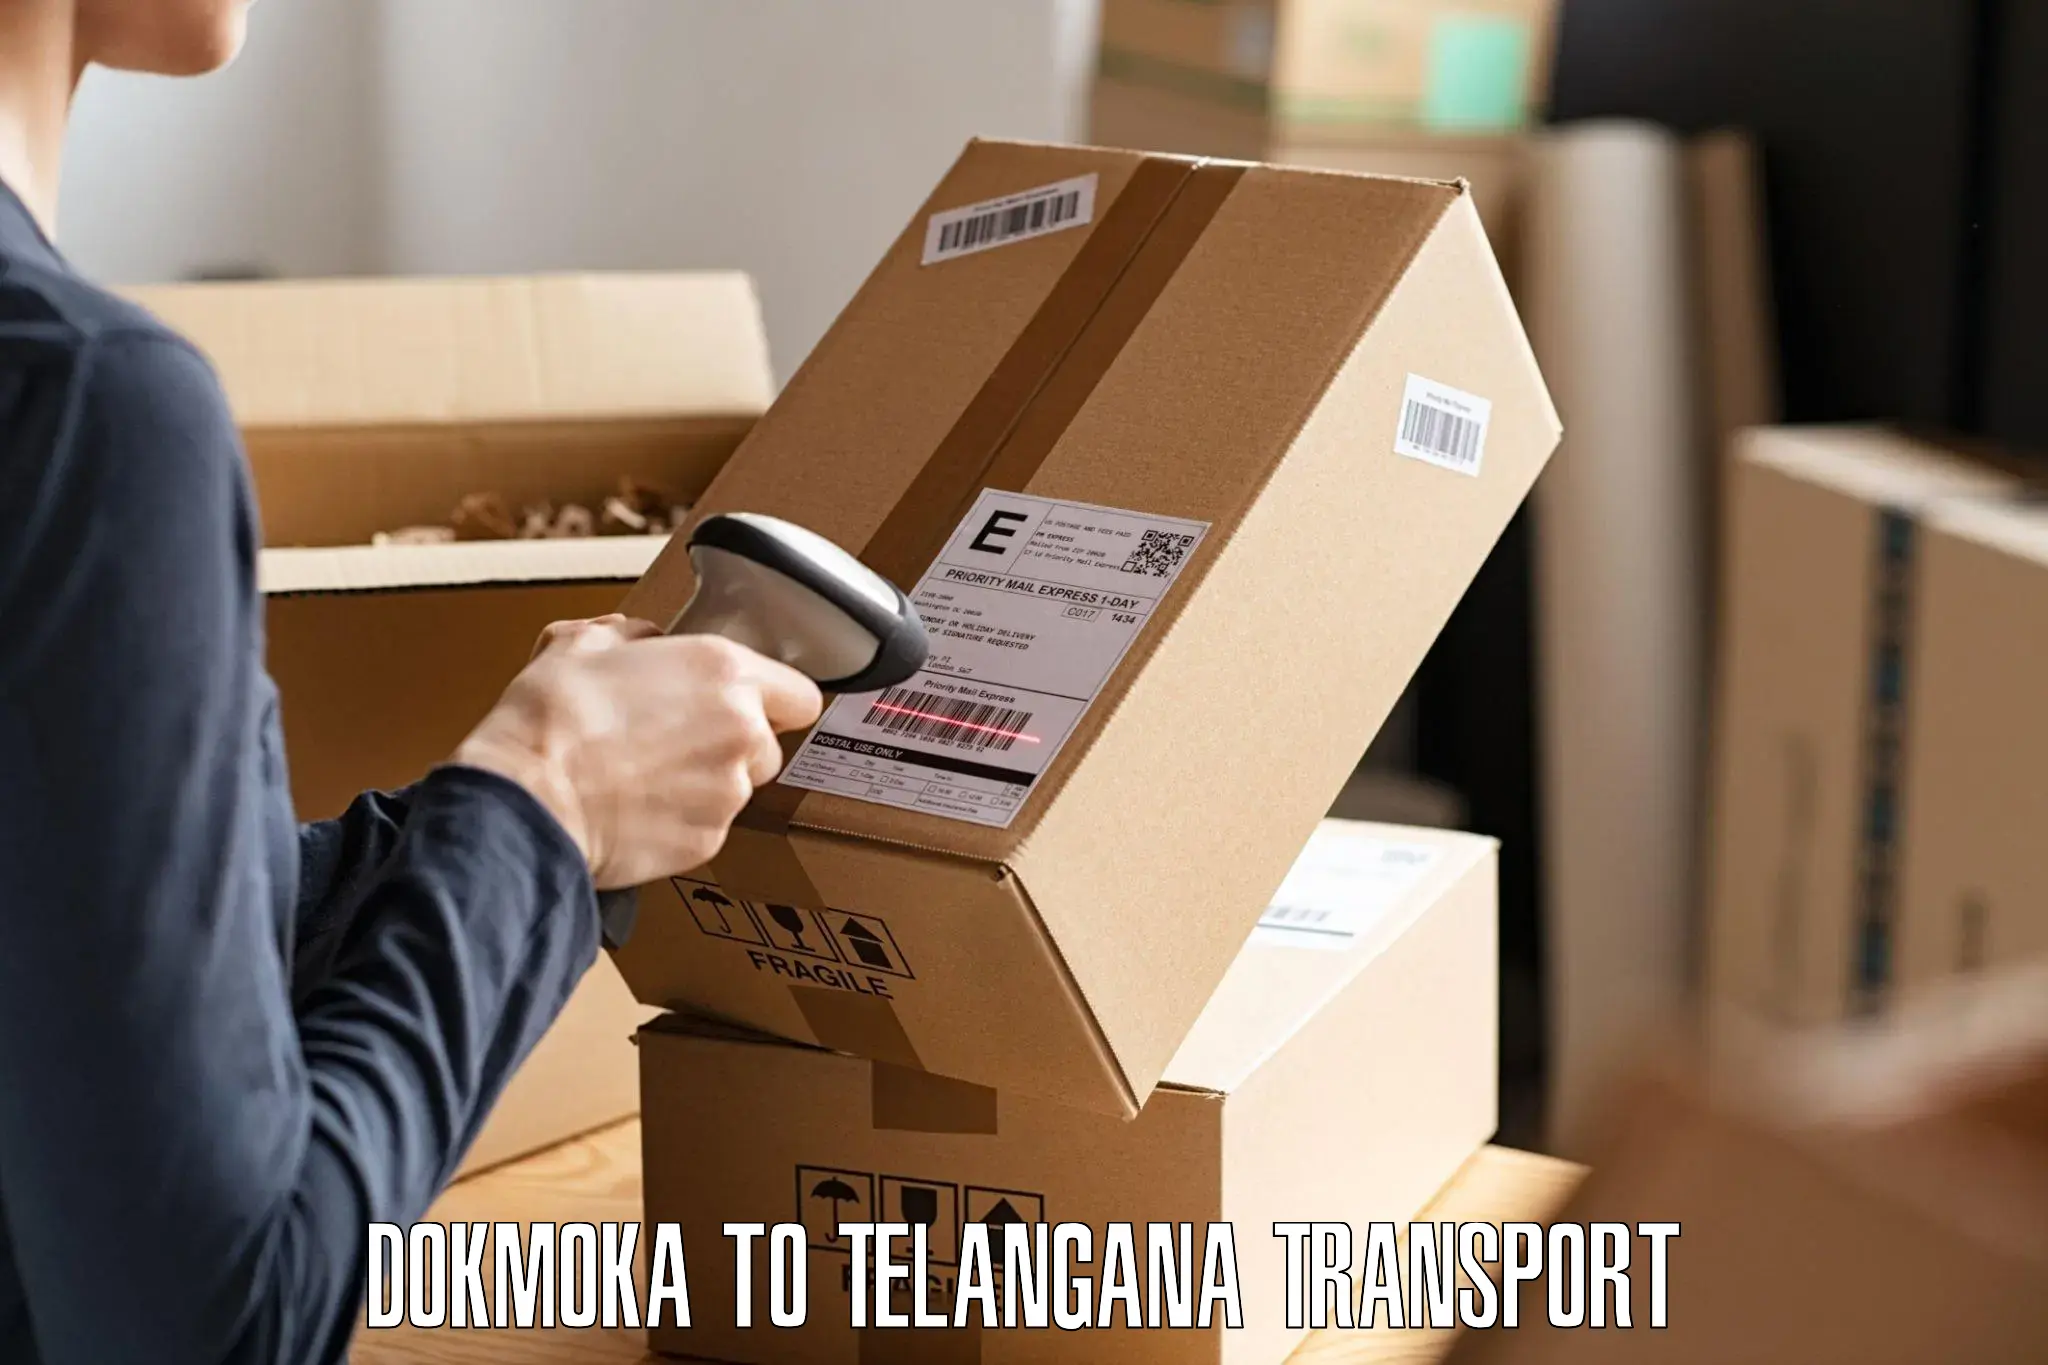 Road transport online services in Dokmoka to Manneguda